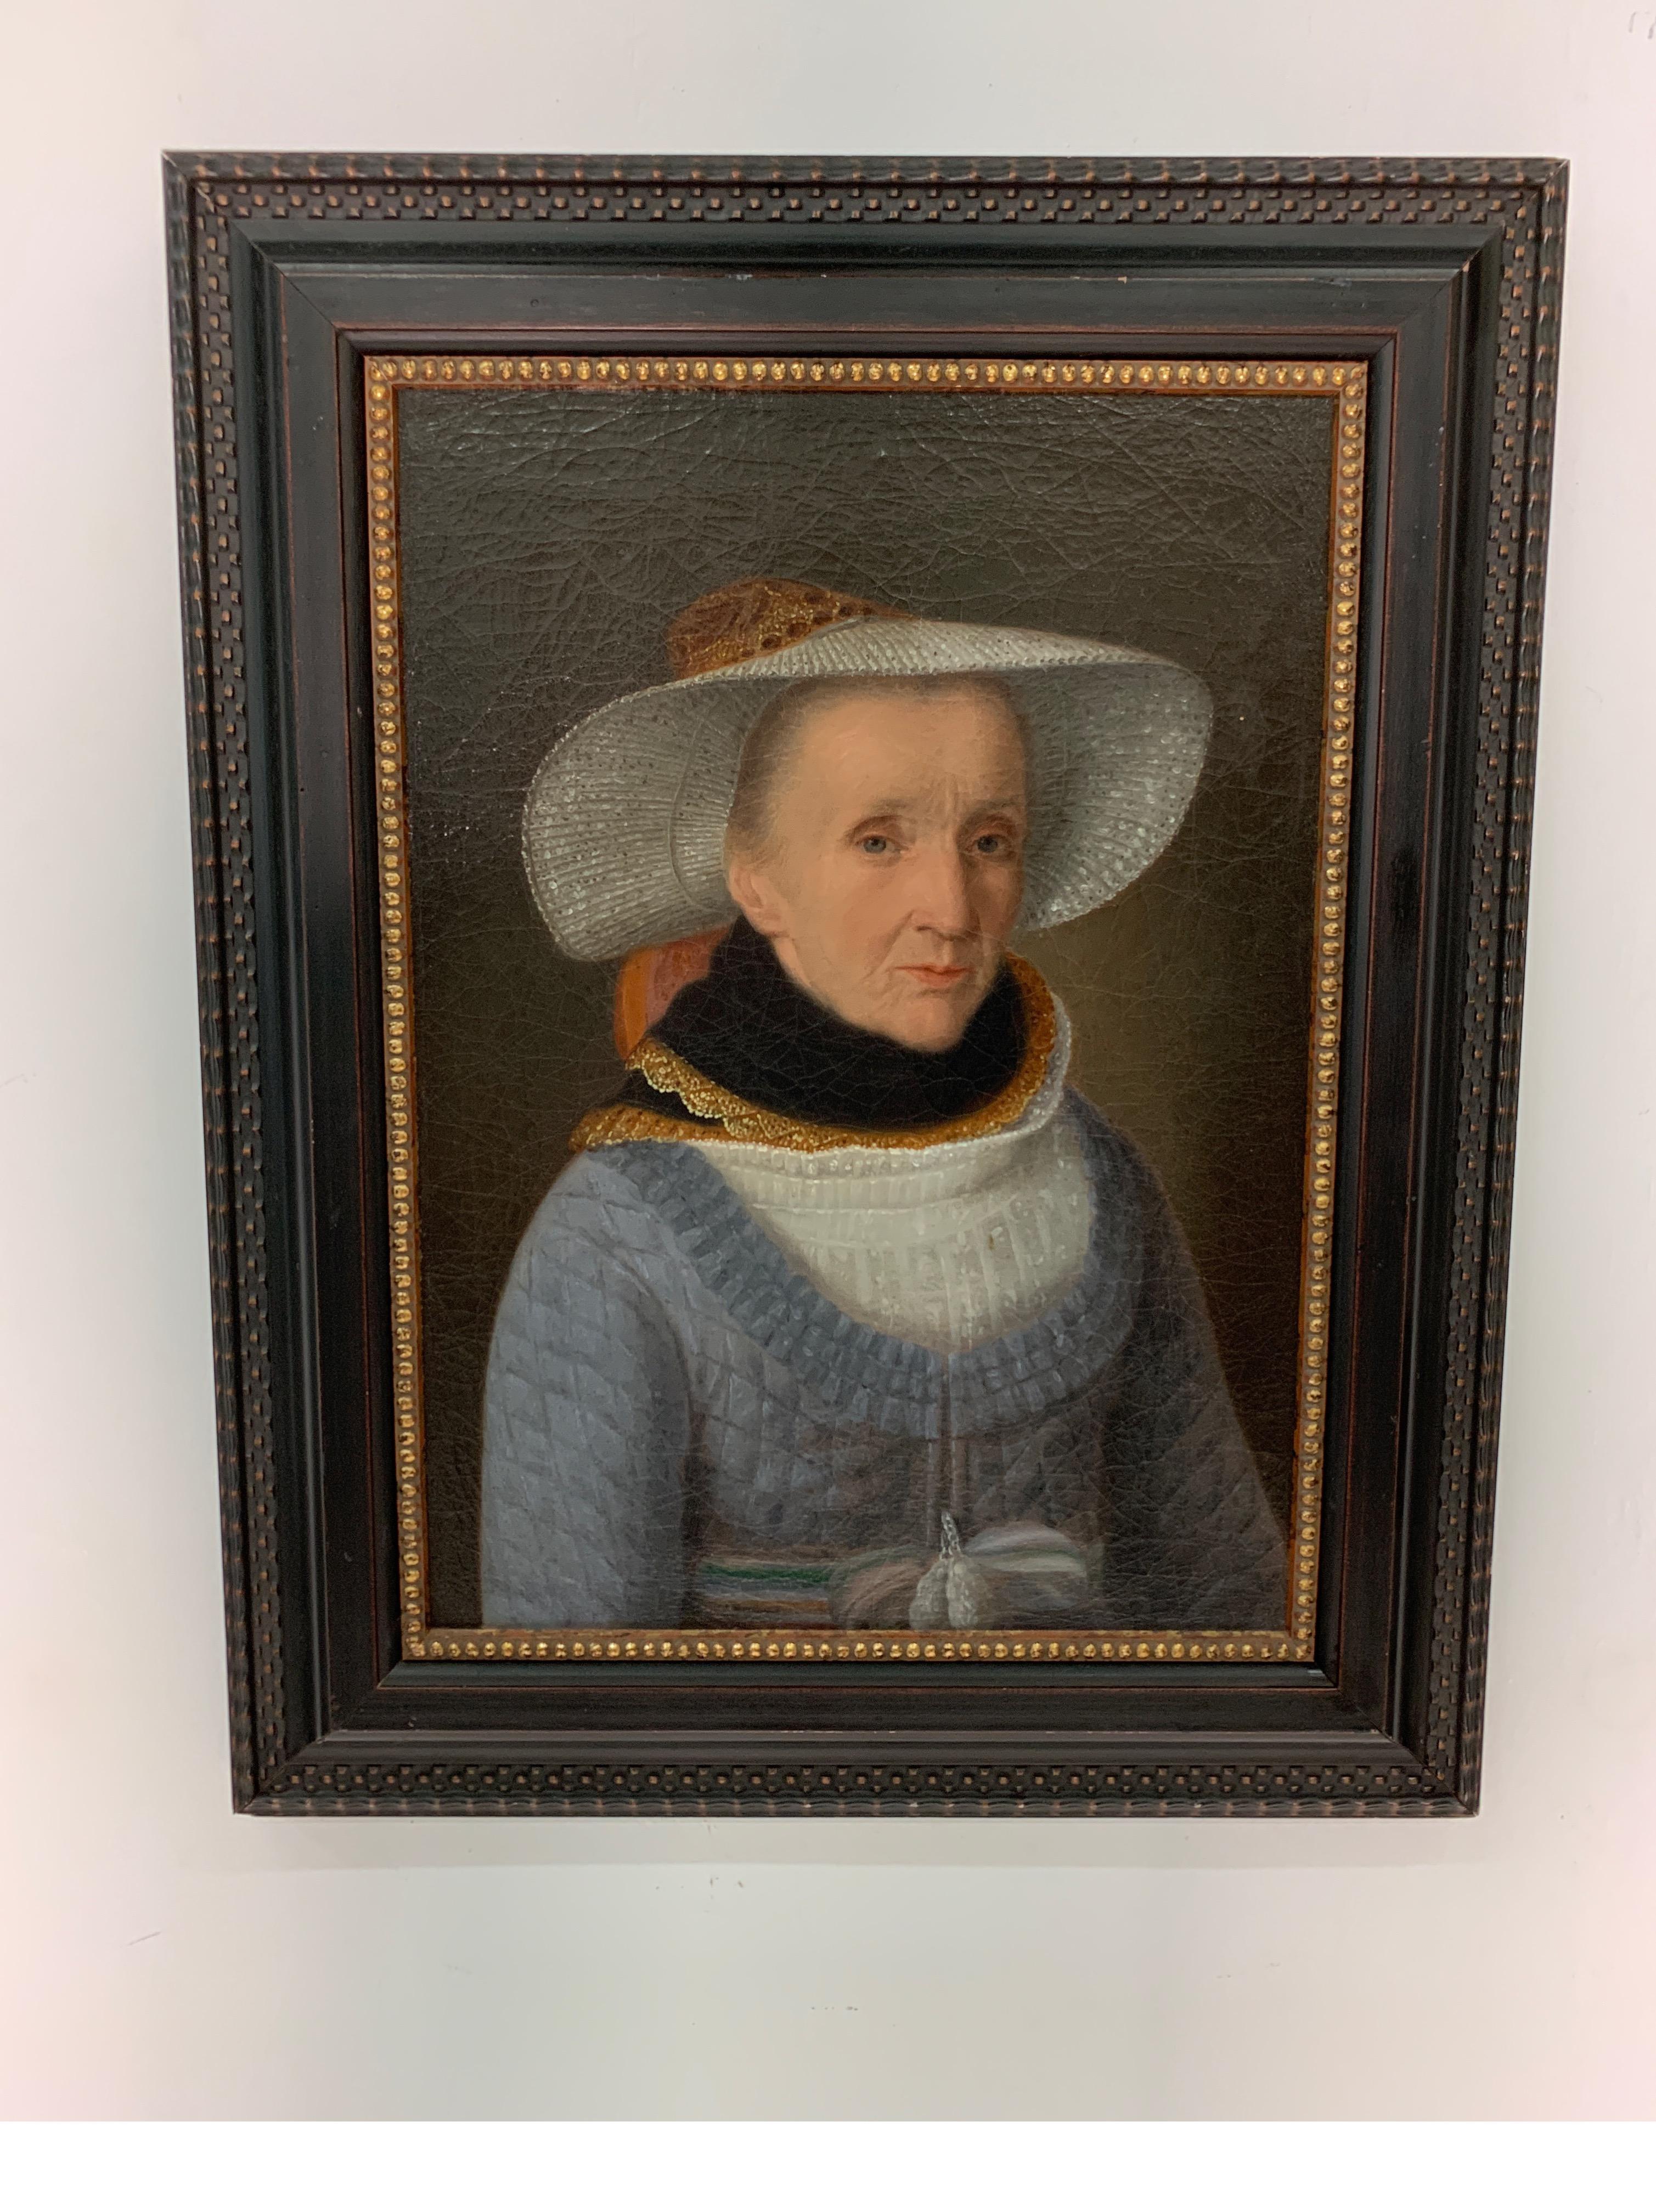 Museum quality 18th century Dutch portrait of an aristocratic woman. The woman, beautifully depicted in period clothing with detailed face and blue eyes. The frame is later but appropriate for the age of the painting. This painting has been